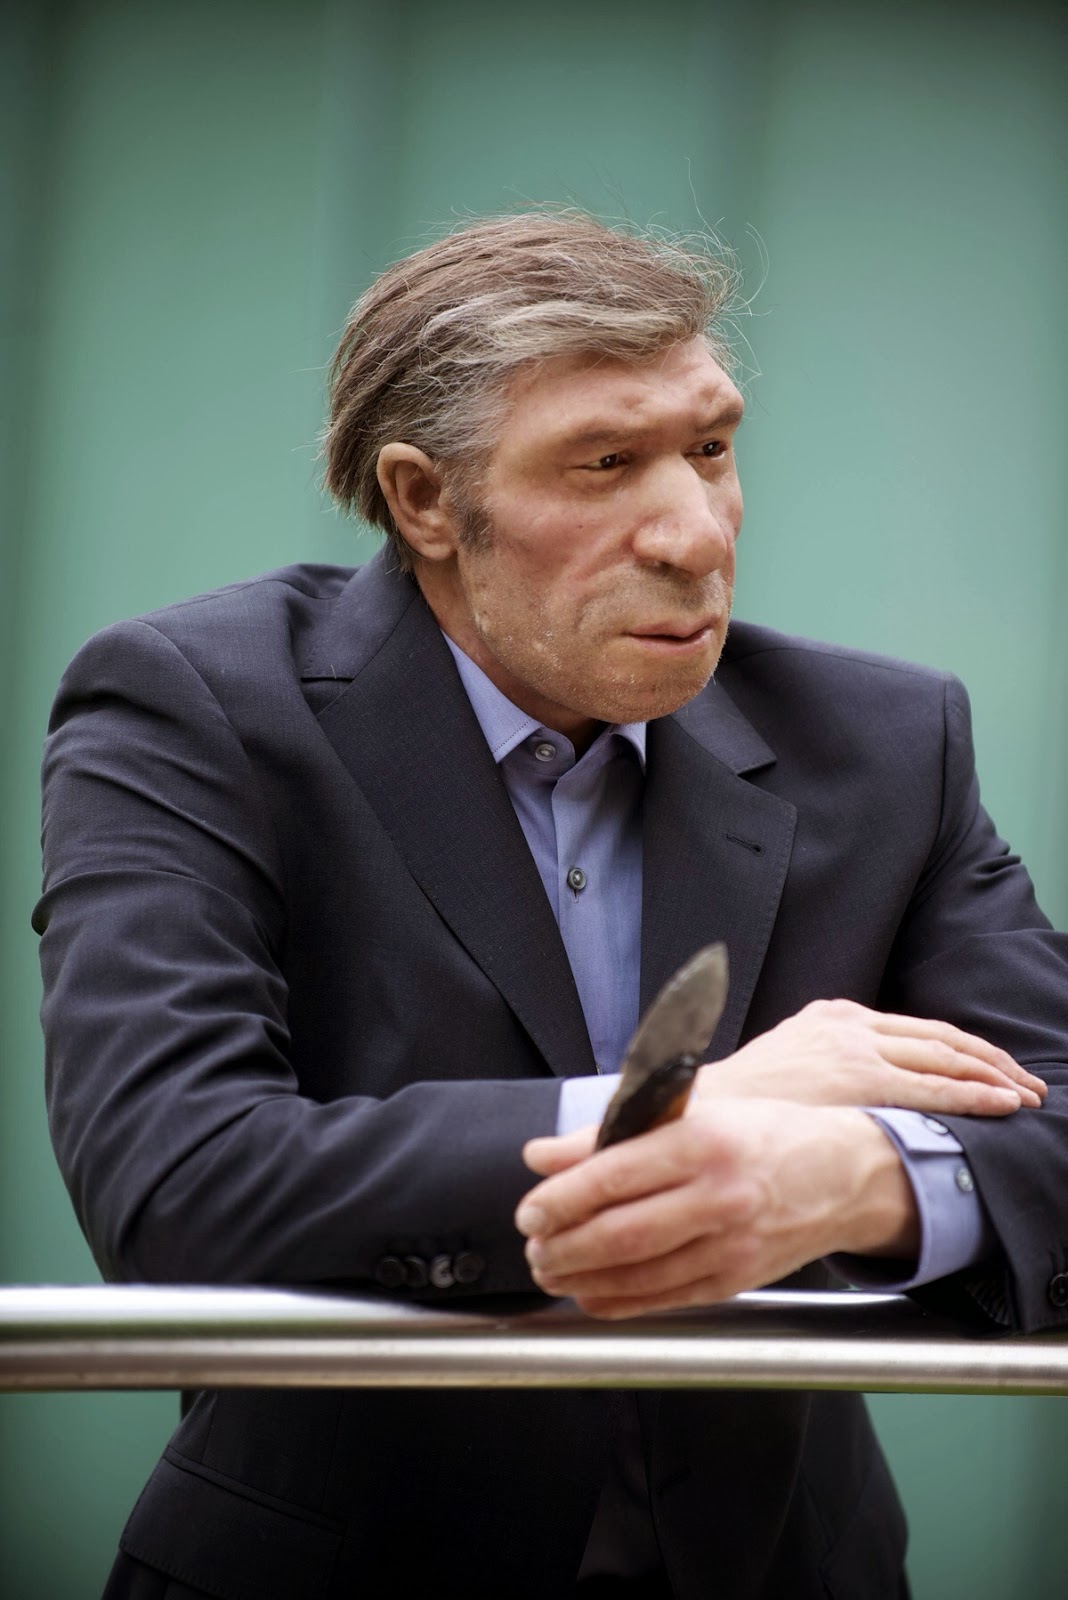 Neanderthal wearing a suit and with Donald Trump's hair.